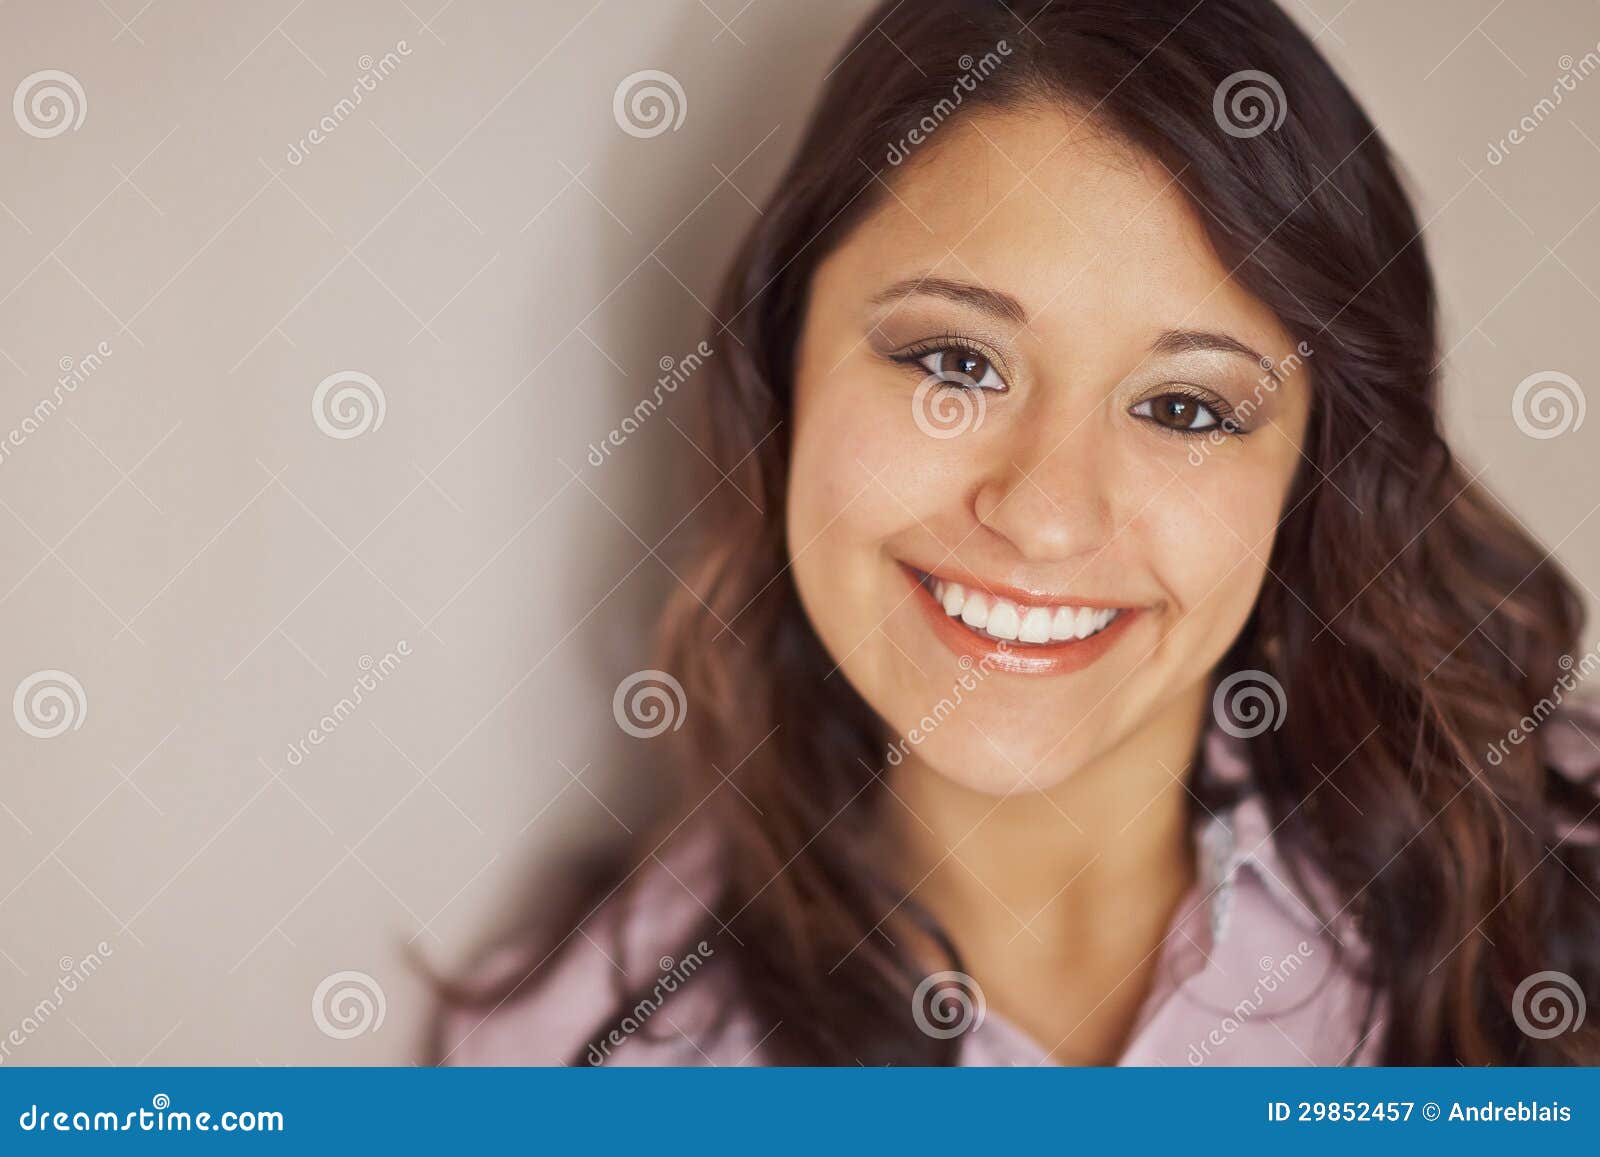 smiling multi ethnic young woman